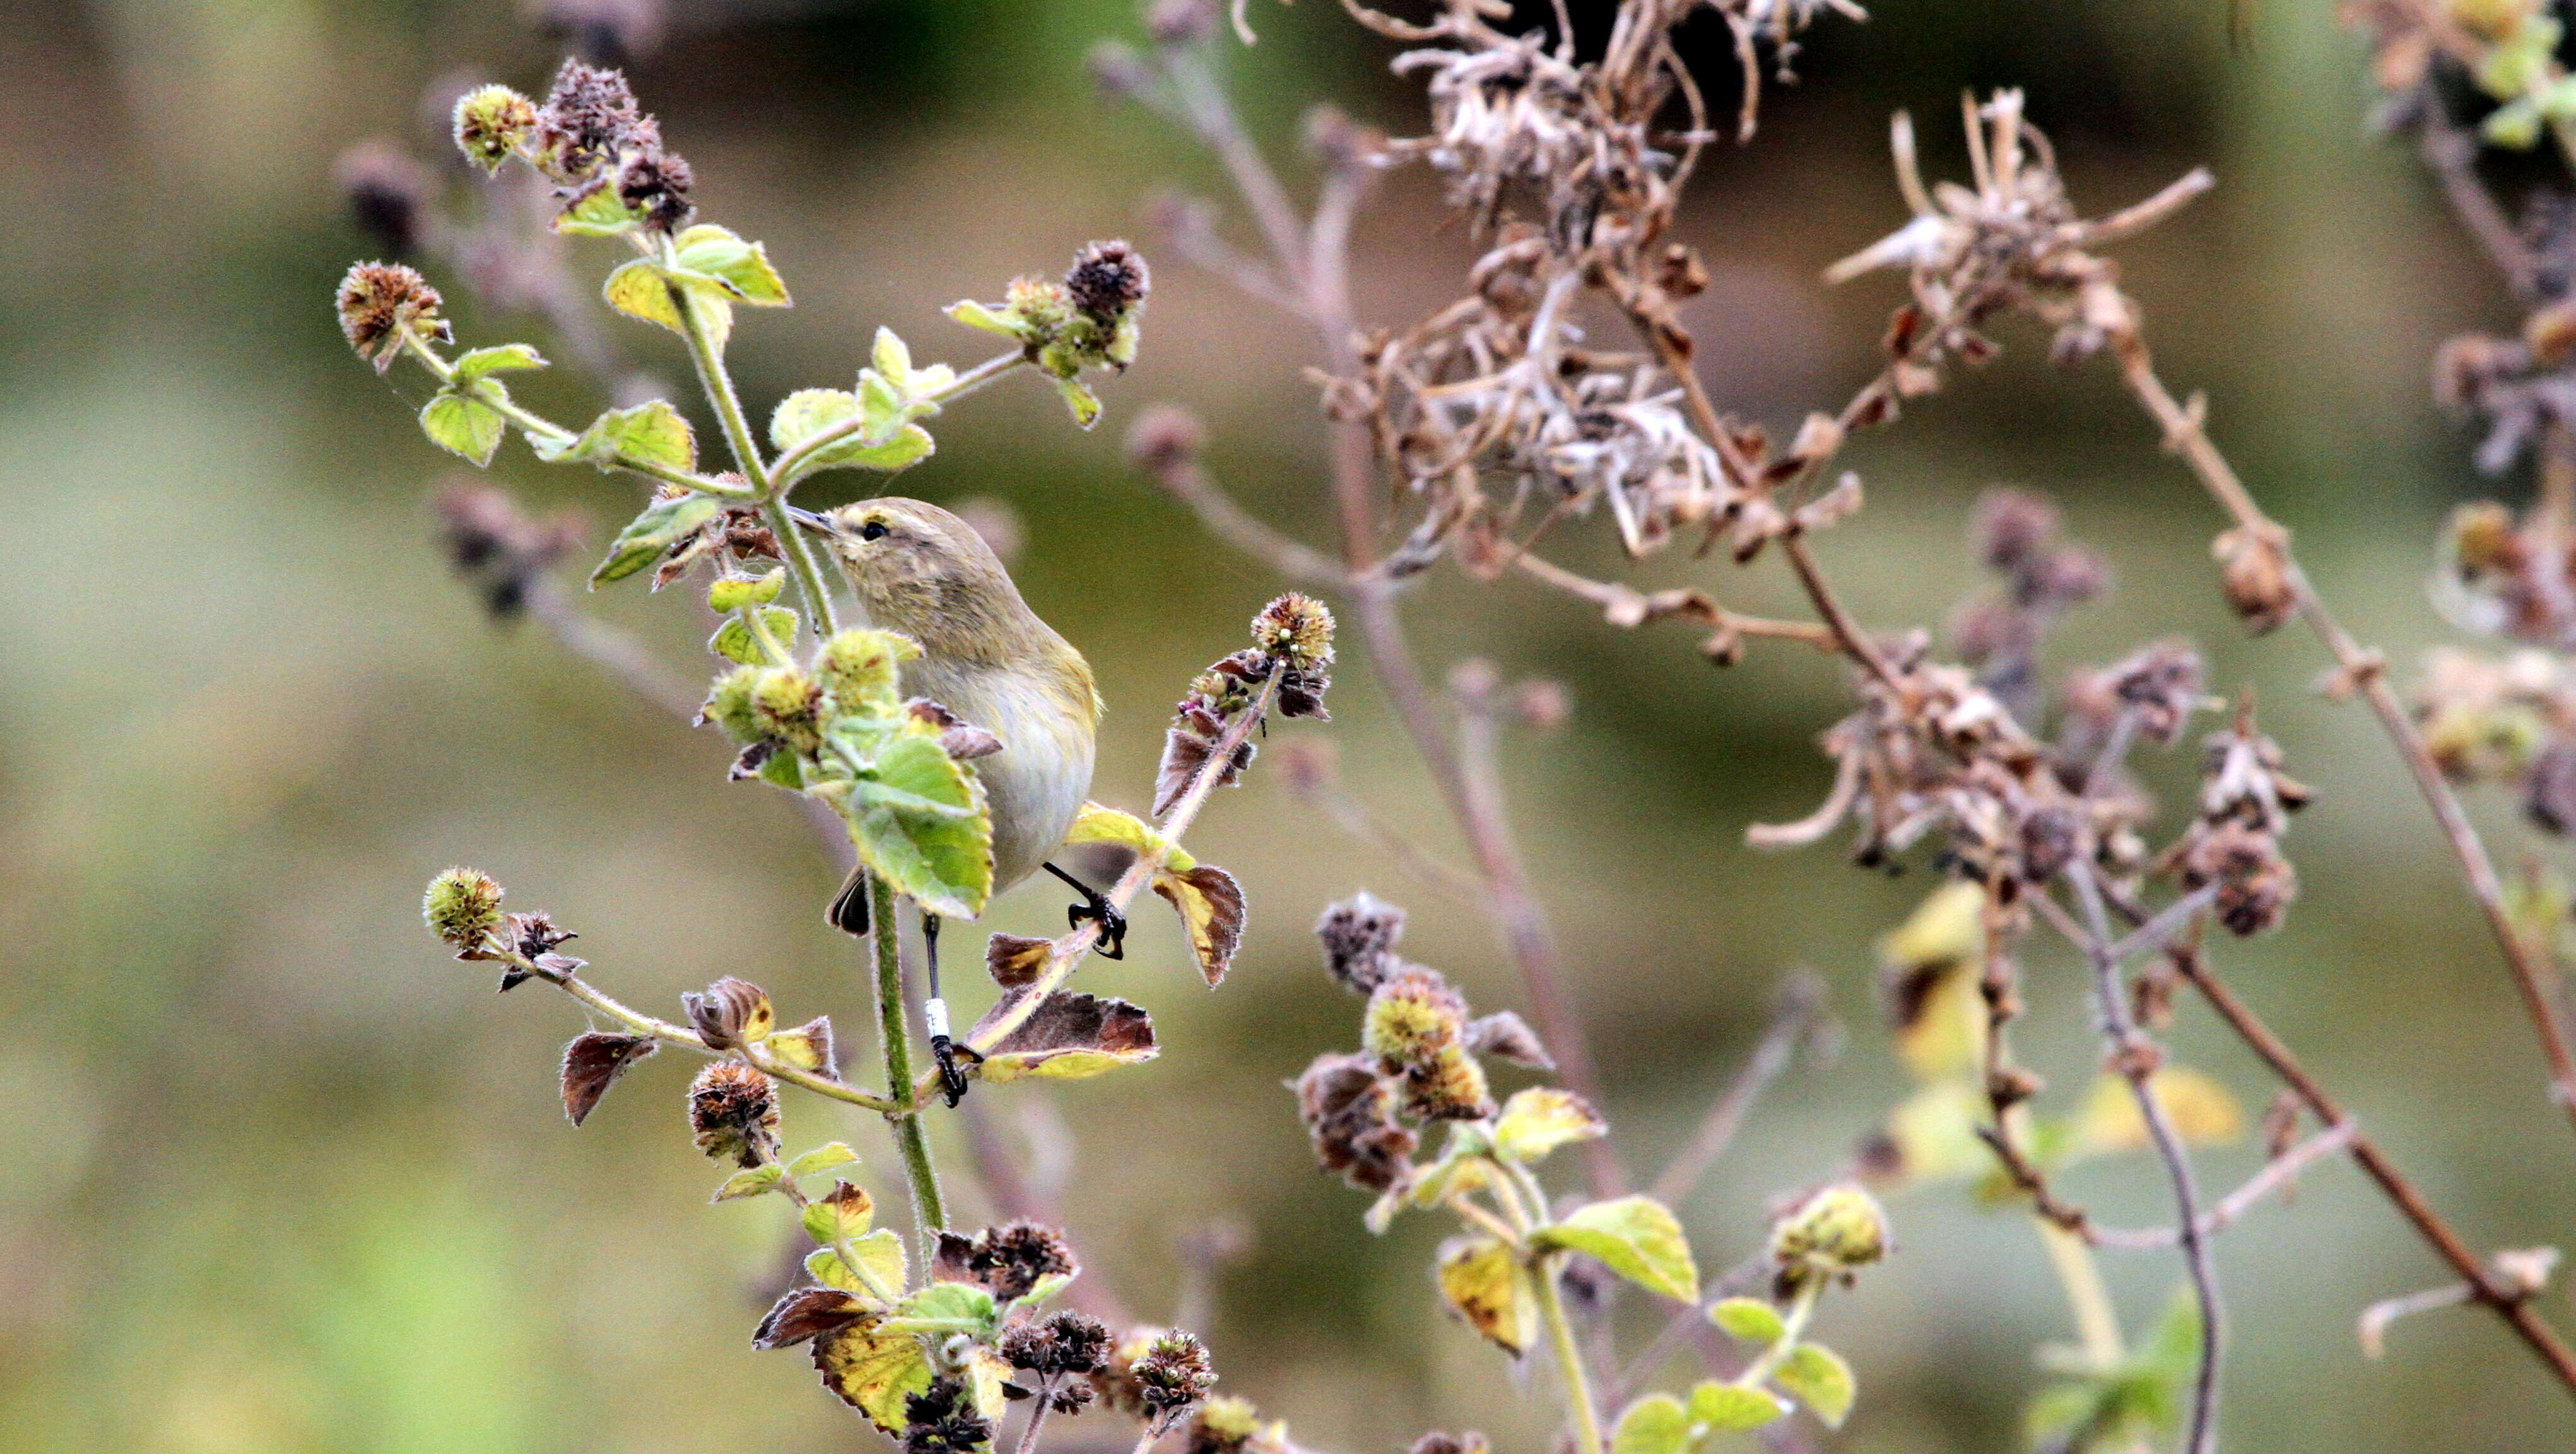 Image of Common Chiffchaff